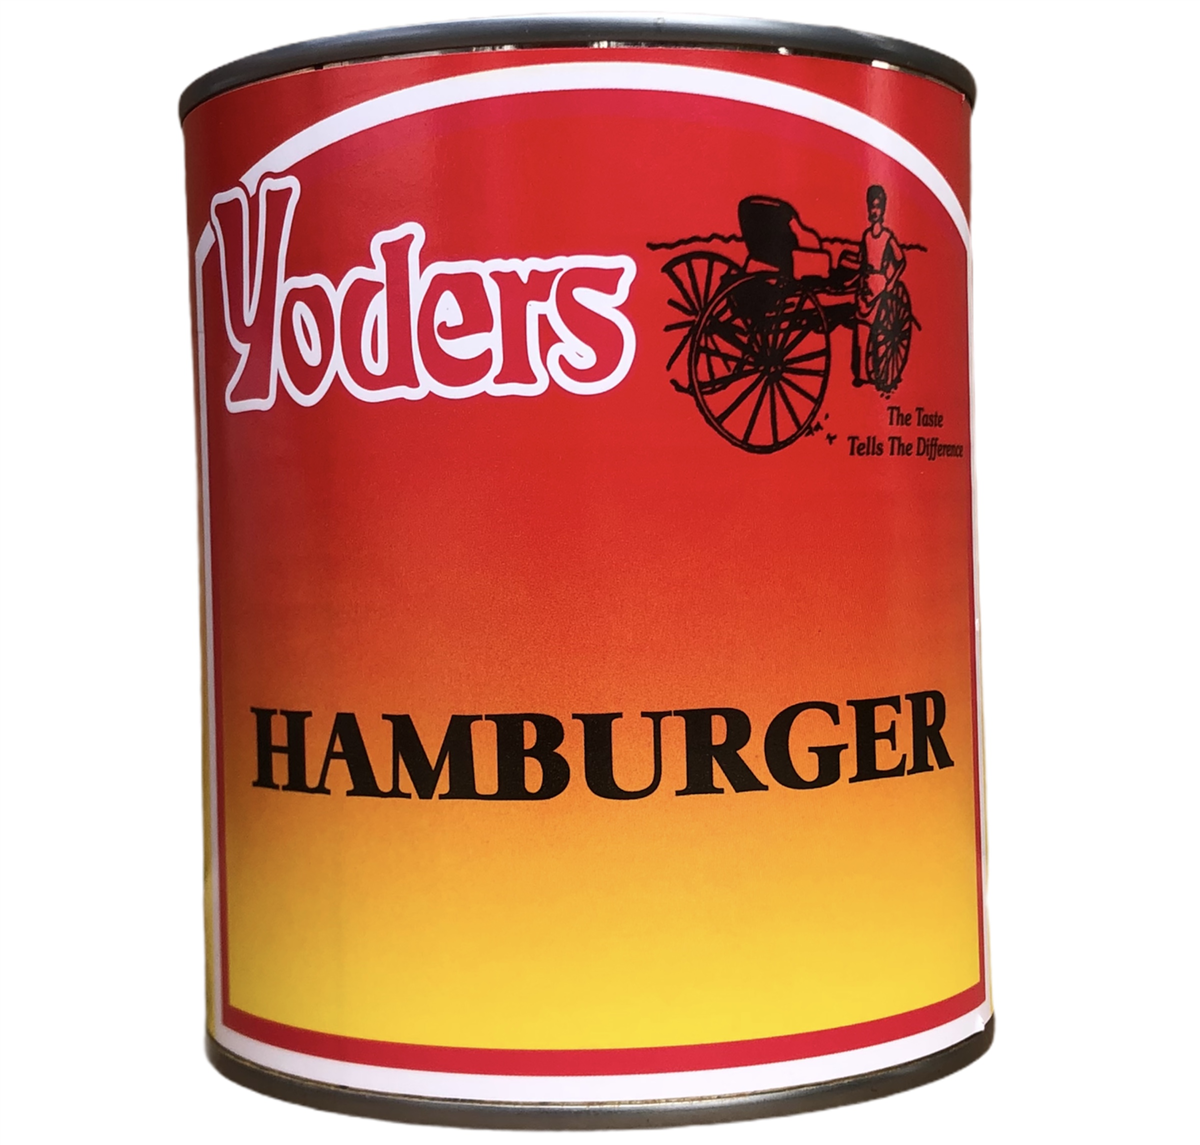 Case (12 Cans) of Yoder's fresh REAL Canned Hamburger Ground Beef